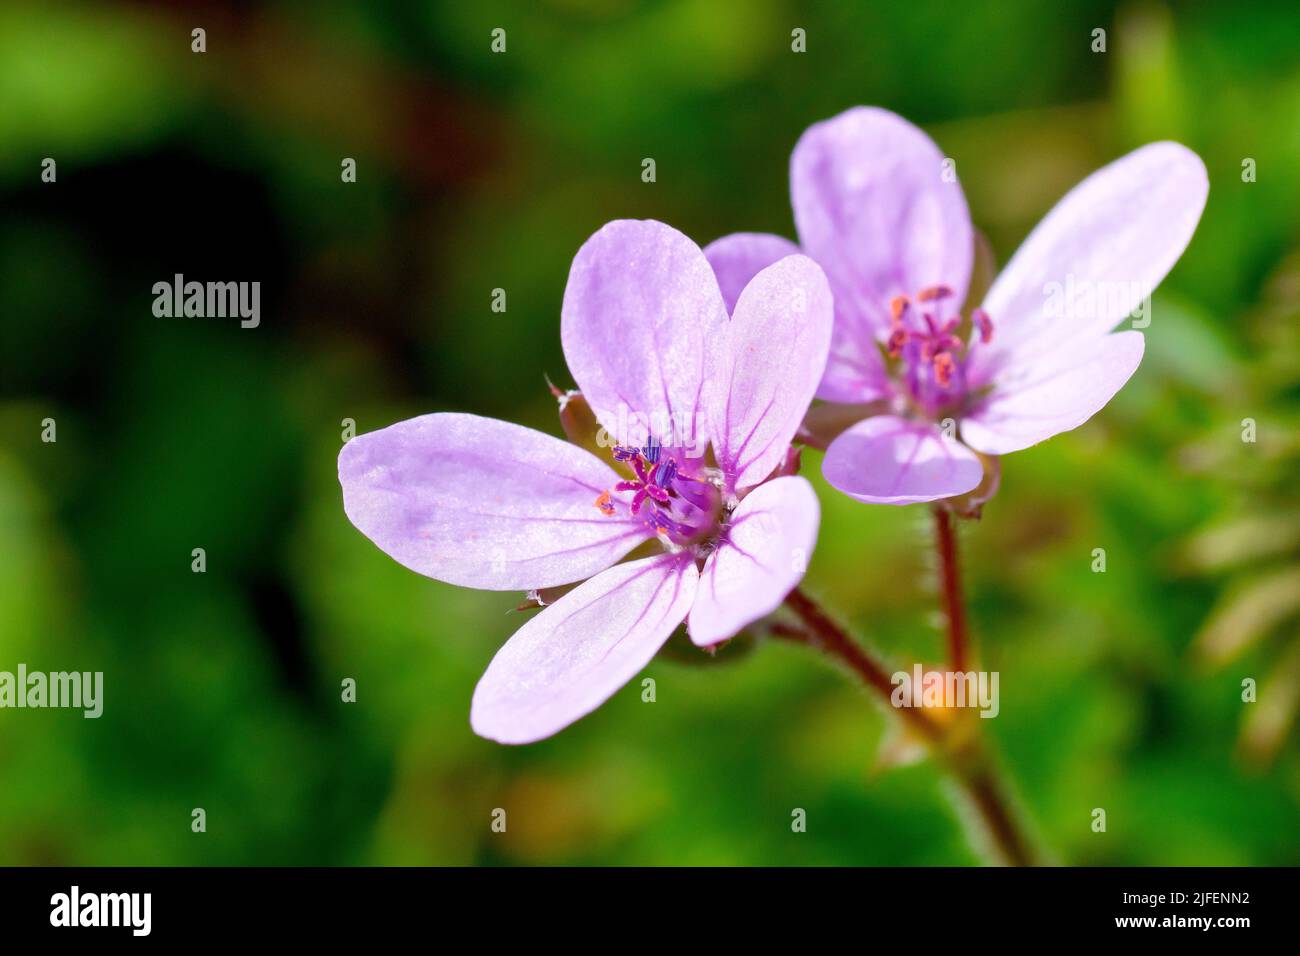 Common Stork's-bill (erodium cicutarium), close up of a pair of pink flowers shot against an out of focus background. Stock Photo